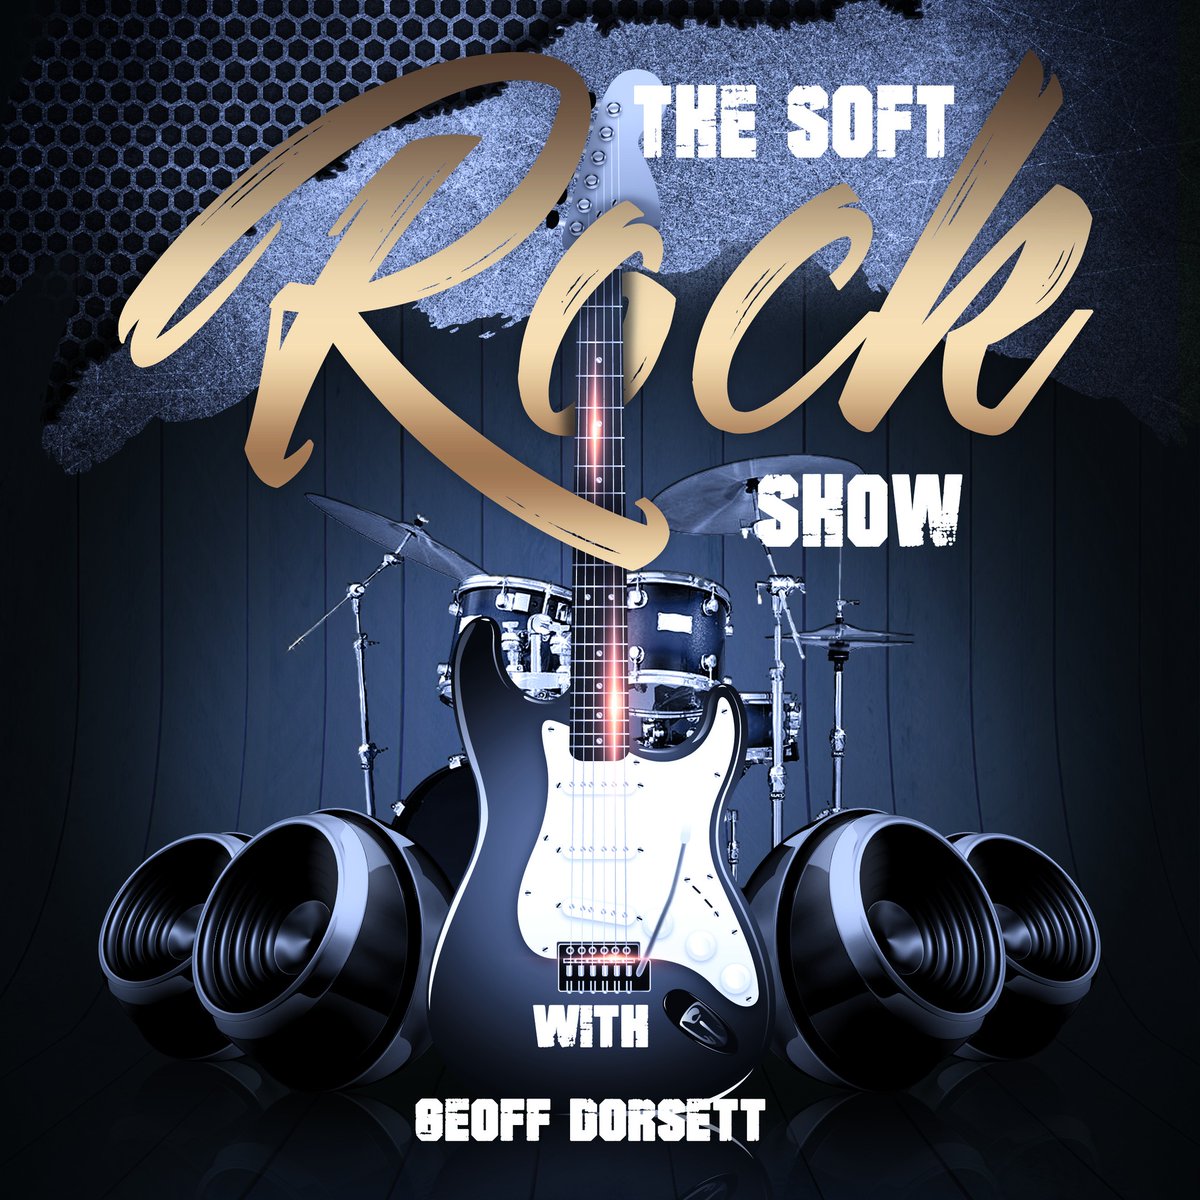 Geoff Dorsett brings you The Soft Rock Show every Monday at 8pm. Two hours of great music. @chunkygeoff